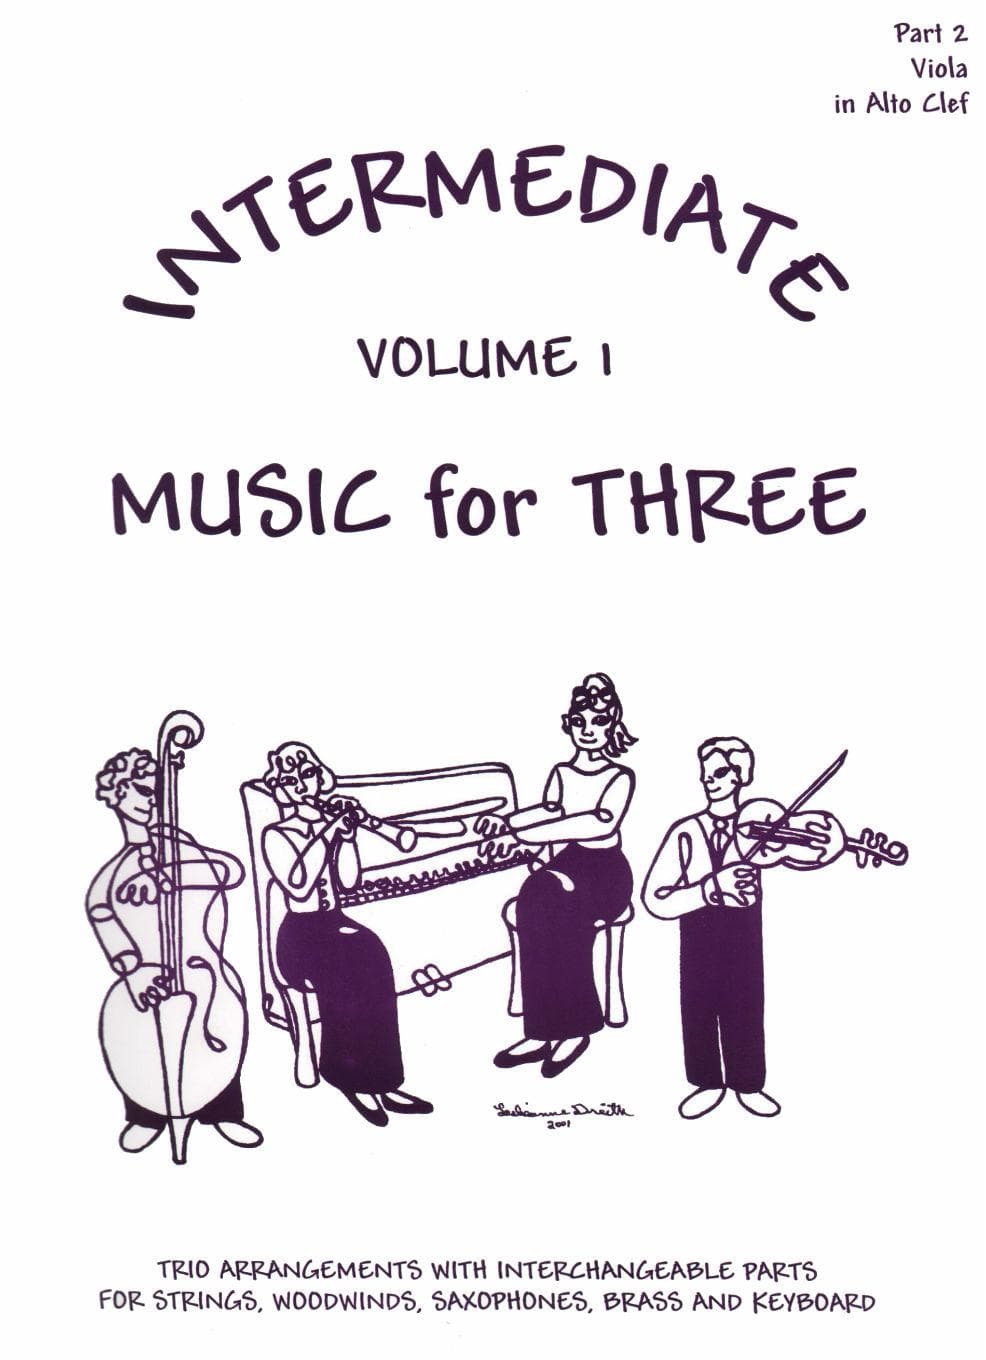 Music for Three, Intermediate, Volume 1, Viola part Published by Last Resort Music